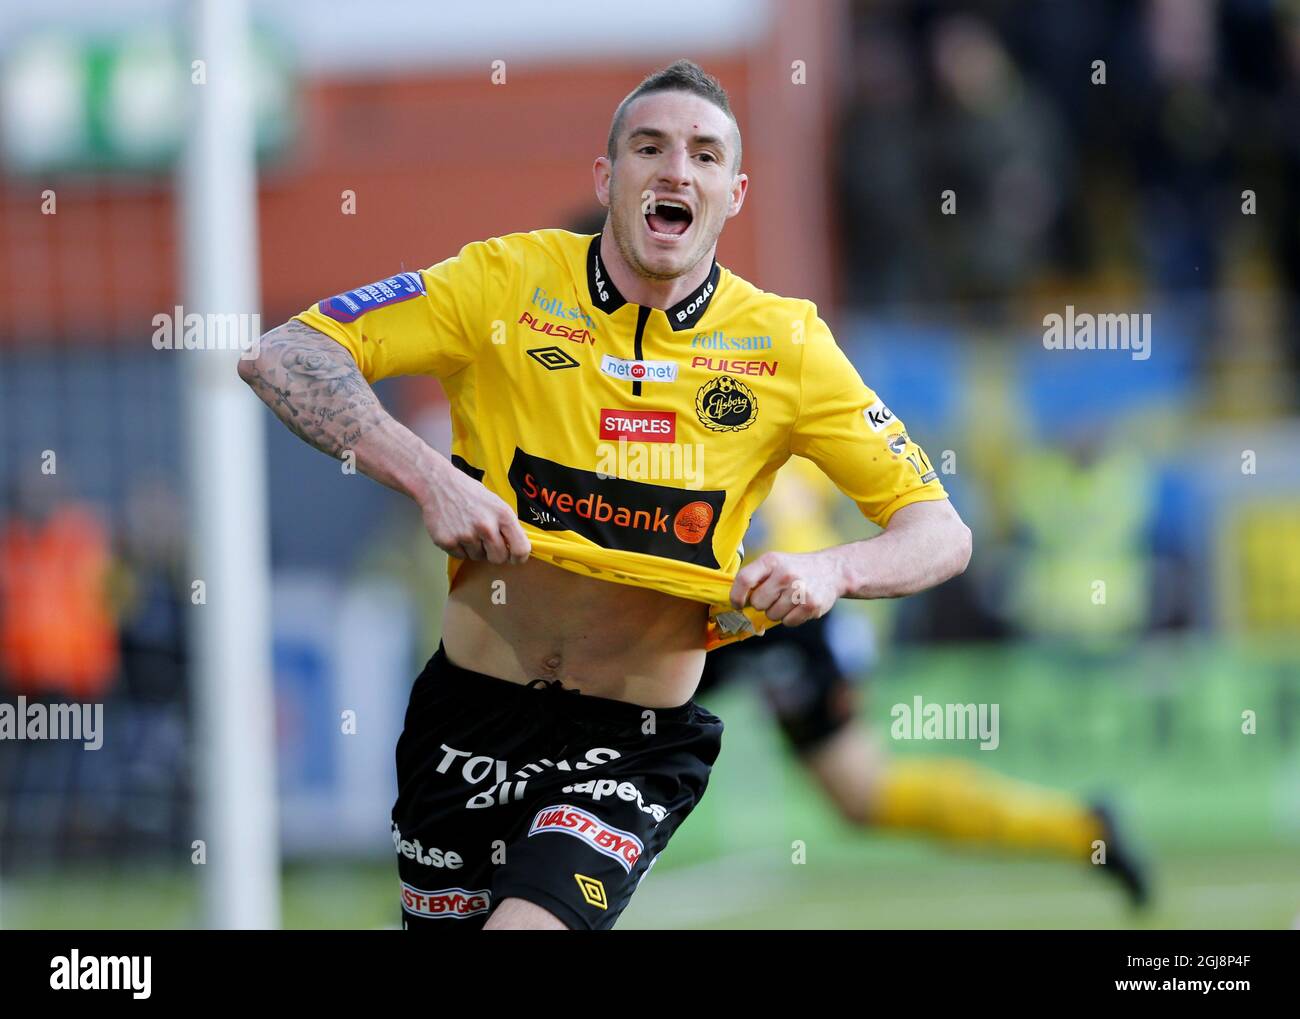 Elfsborg James Keene rejoices after the 2-2 equalizer in the national championship football game between IF Elfsborg and AIK at Borås arena. Stock Photo